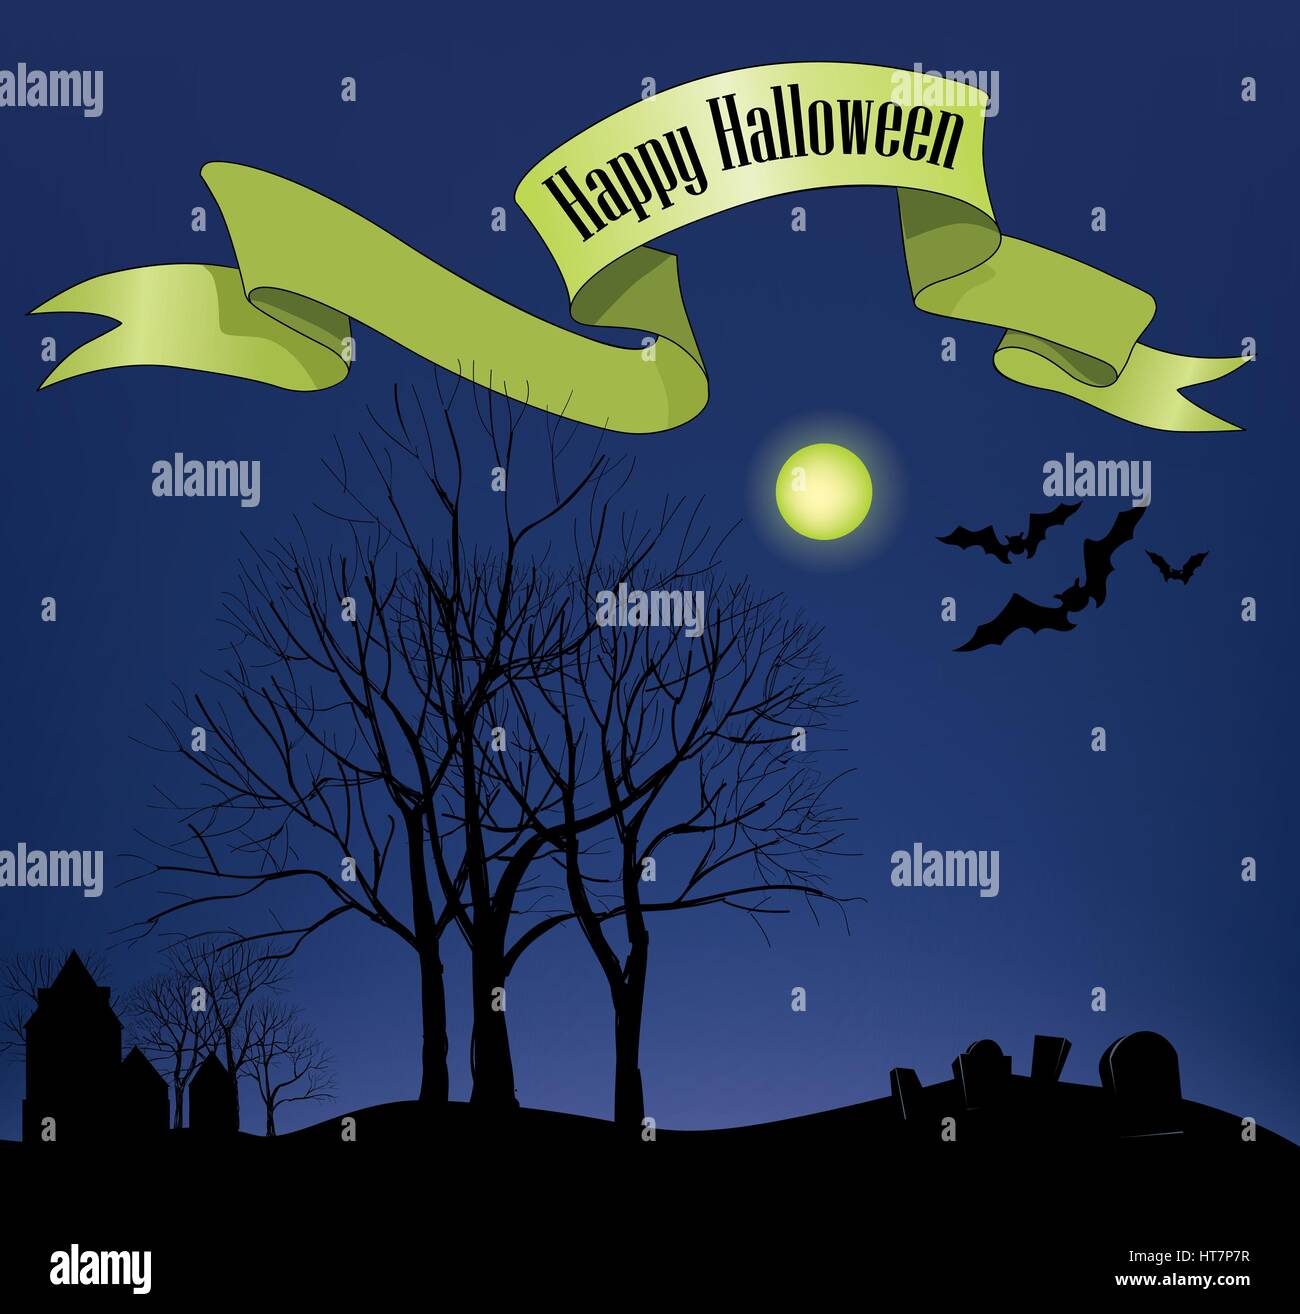 Halloween greeting card. Holiday Halloween landscape background Stock Vector